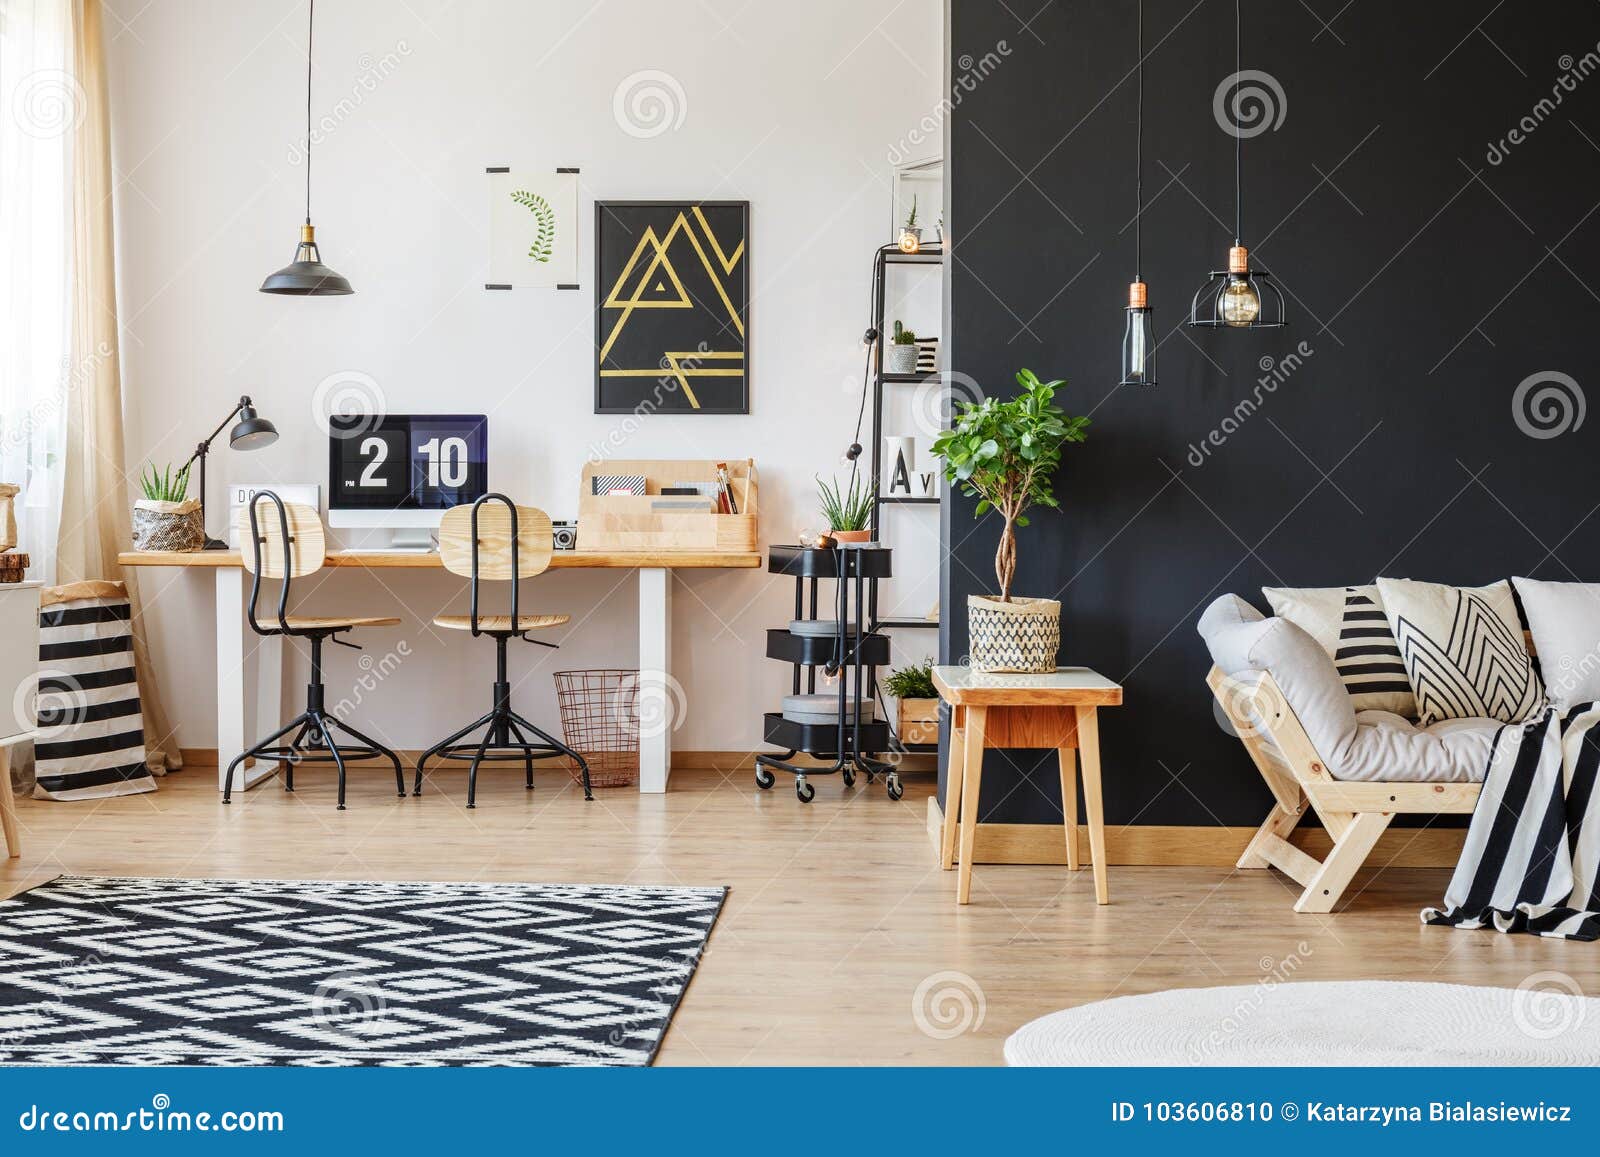 trendy workspace with two chairs